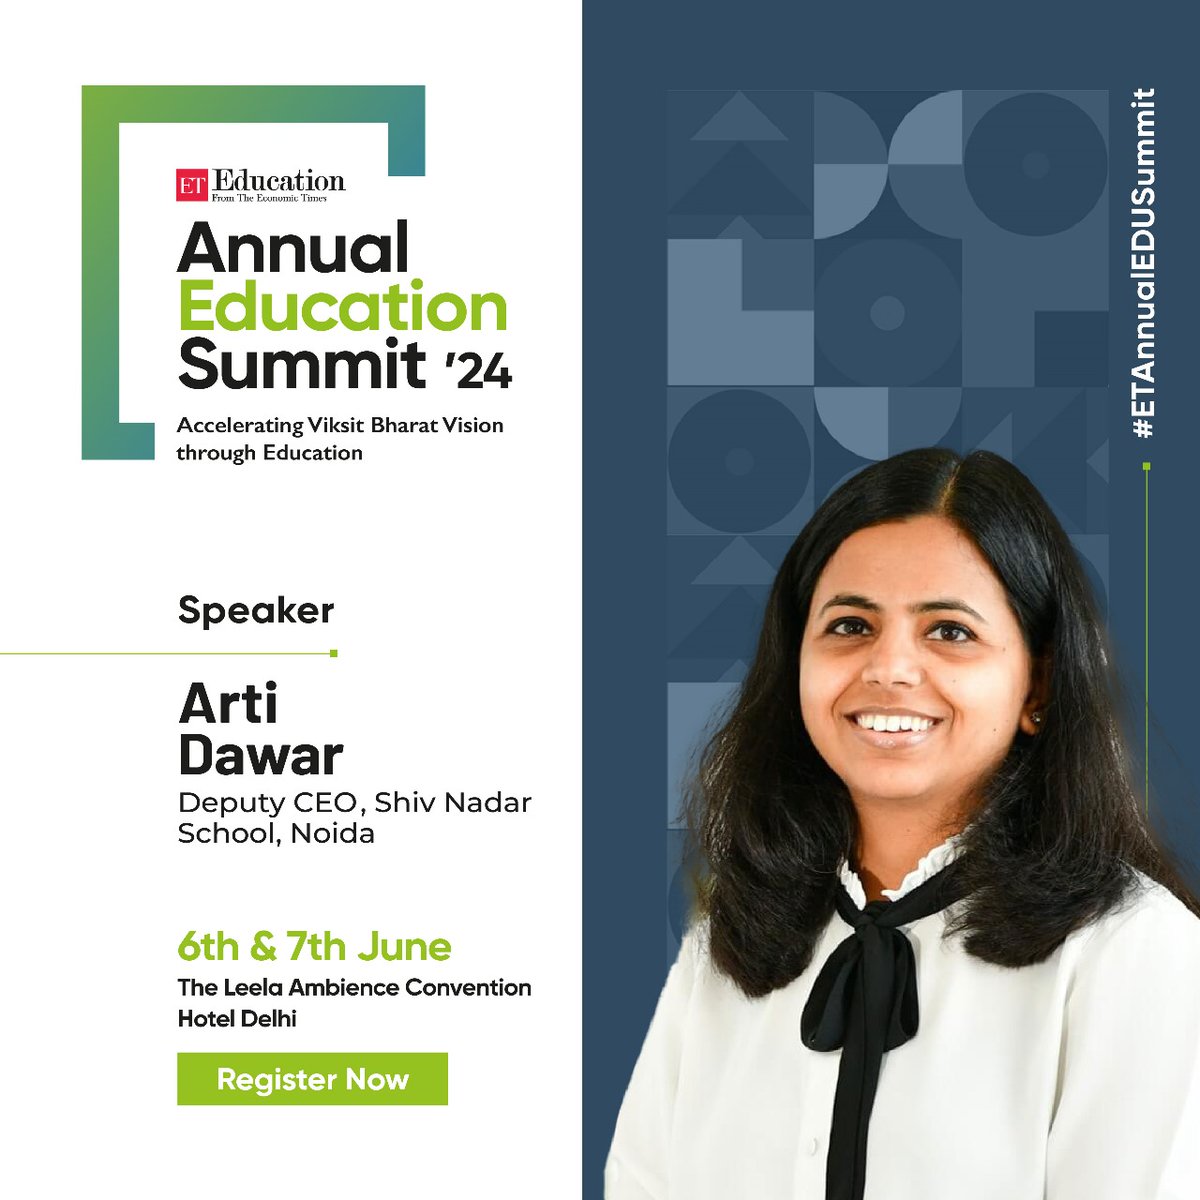 It's time to turn the spotlight on!

We're elated to welcome our speaker Arti Dawar, Deputy CEO, @ShivNadarSchool, Noida at #ETAnnualEDUSummit!

Register Now - bit.ly/3PpTQJ9

#ETEducation #Education #Summit #TechEdu #EdTech #TechInEducation #School #STEMEducation